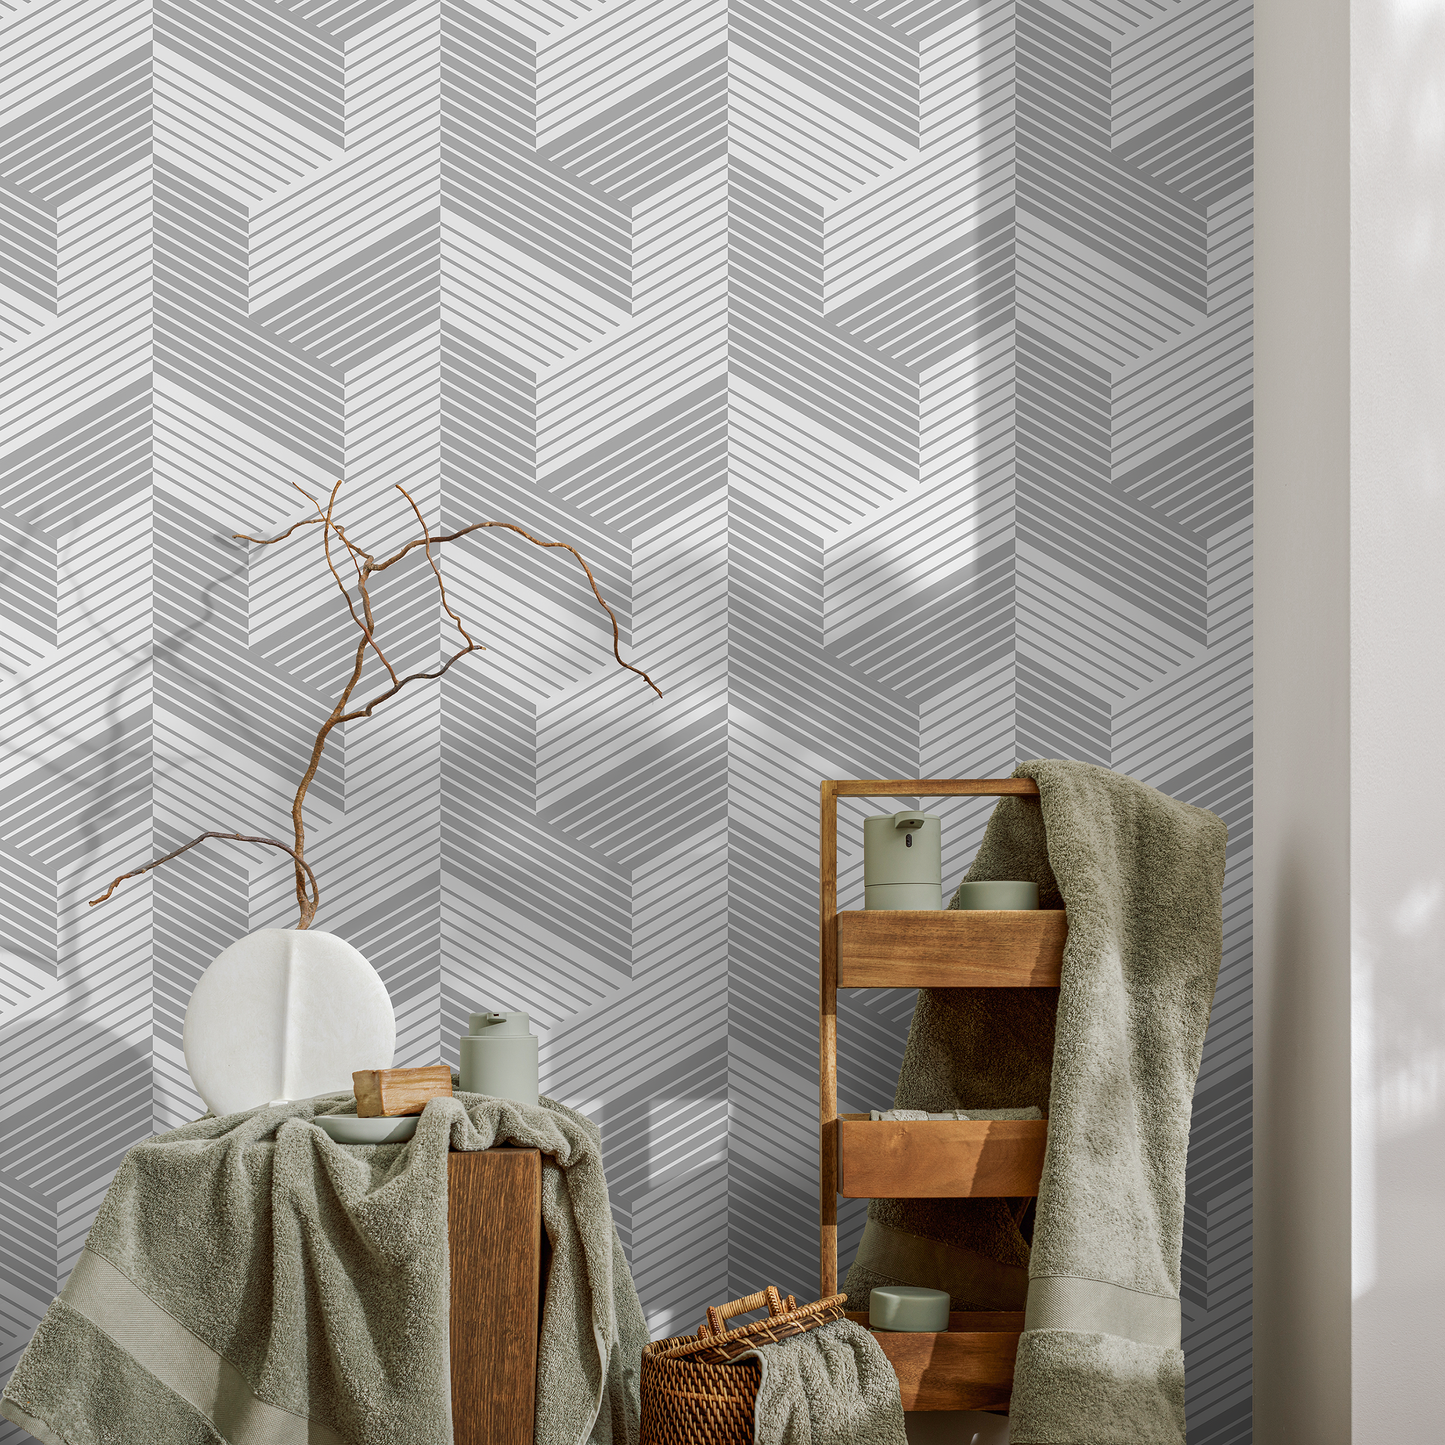 Removable Wallpaper Peel and Stick Wallpaper Wall Paper Wall Mural - Geometric Wallpaper - A484